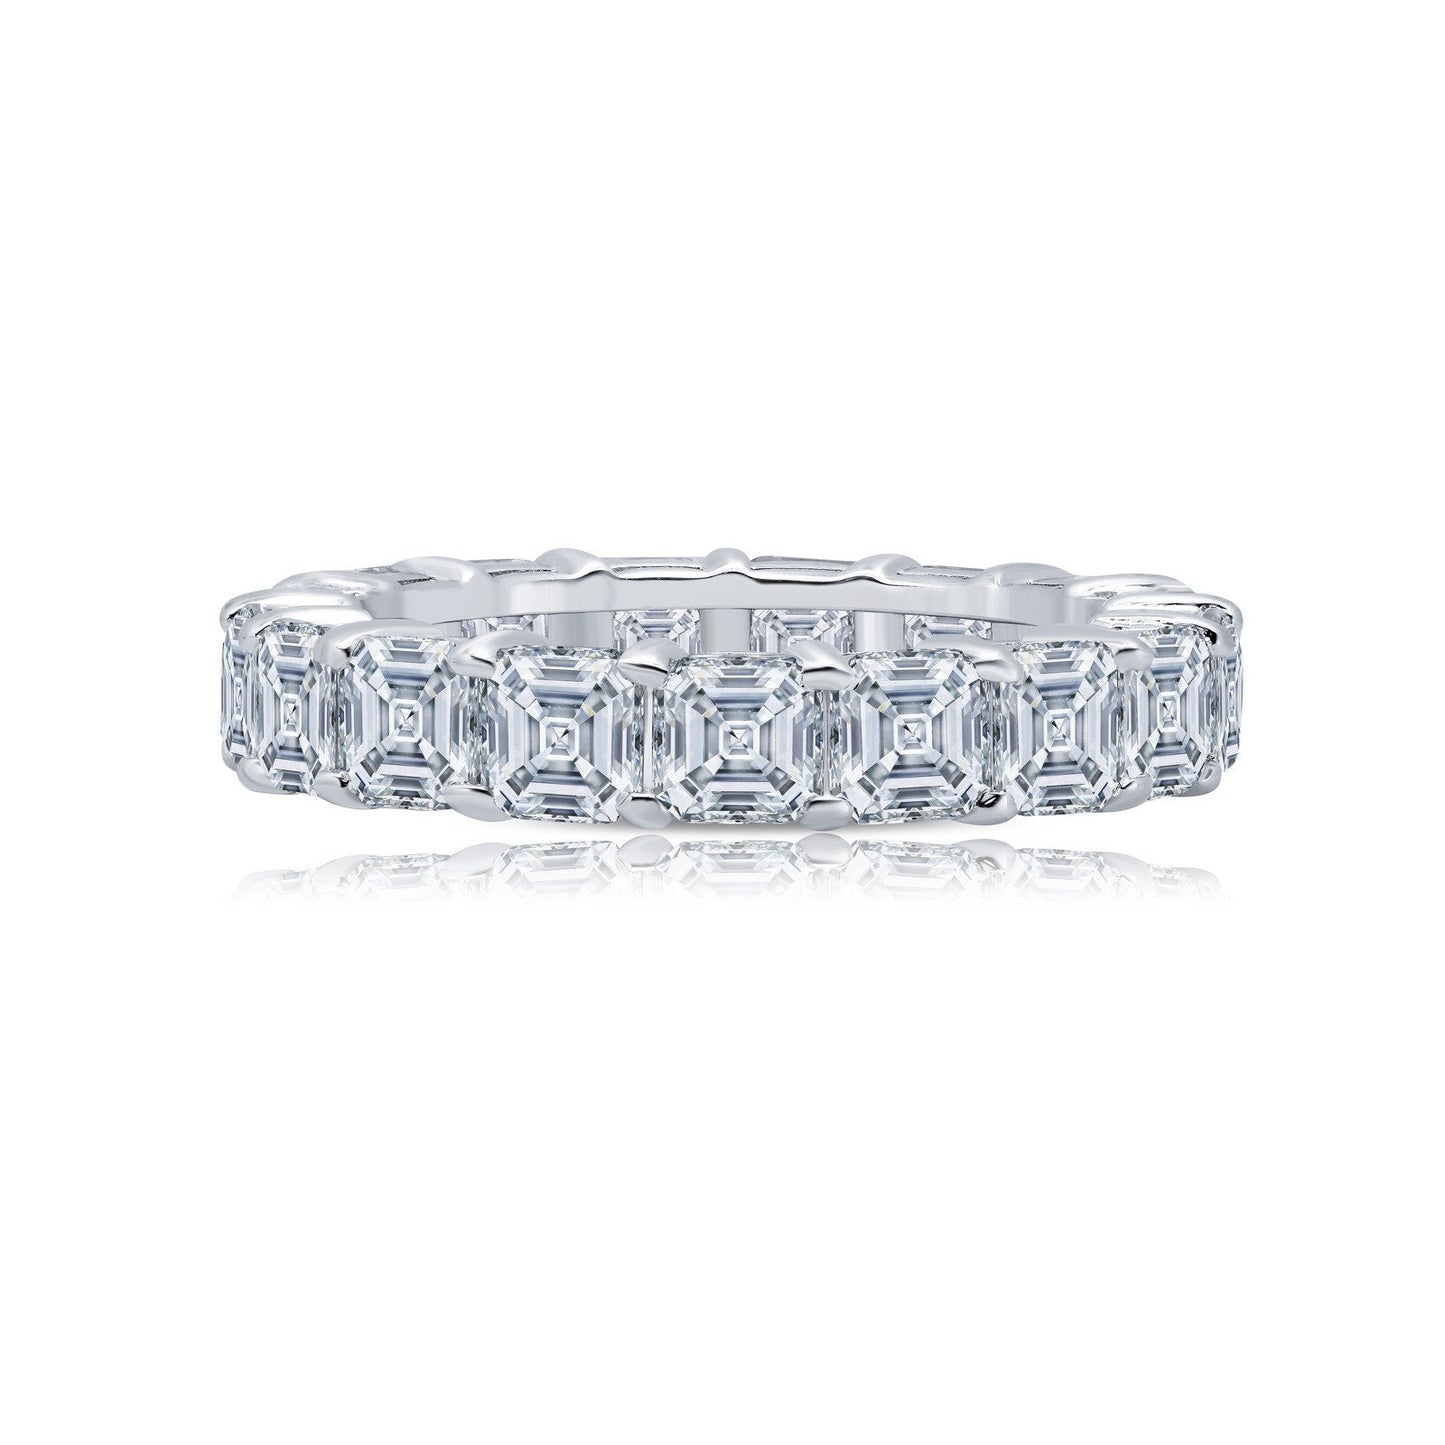 Load image into Gallery viewer, Lafonn 6.63 CTW Anniversary Eternity Band Simulated Diamond RINGS Size 10 Platinum 6.63 CTS Approx. 4mm (W)
